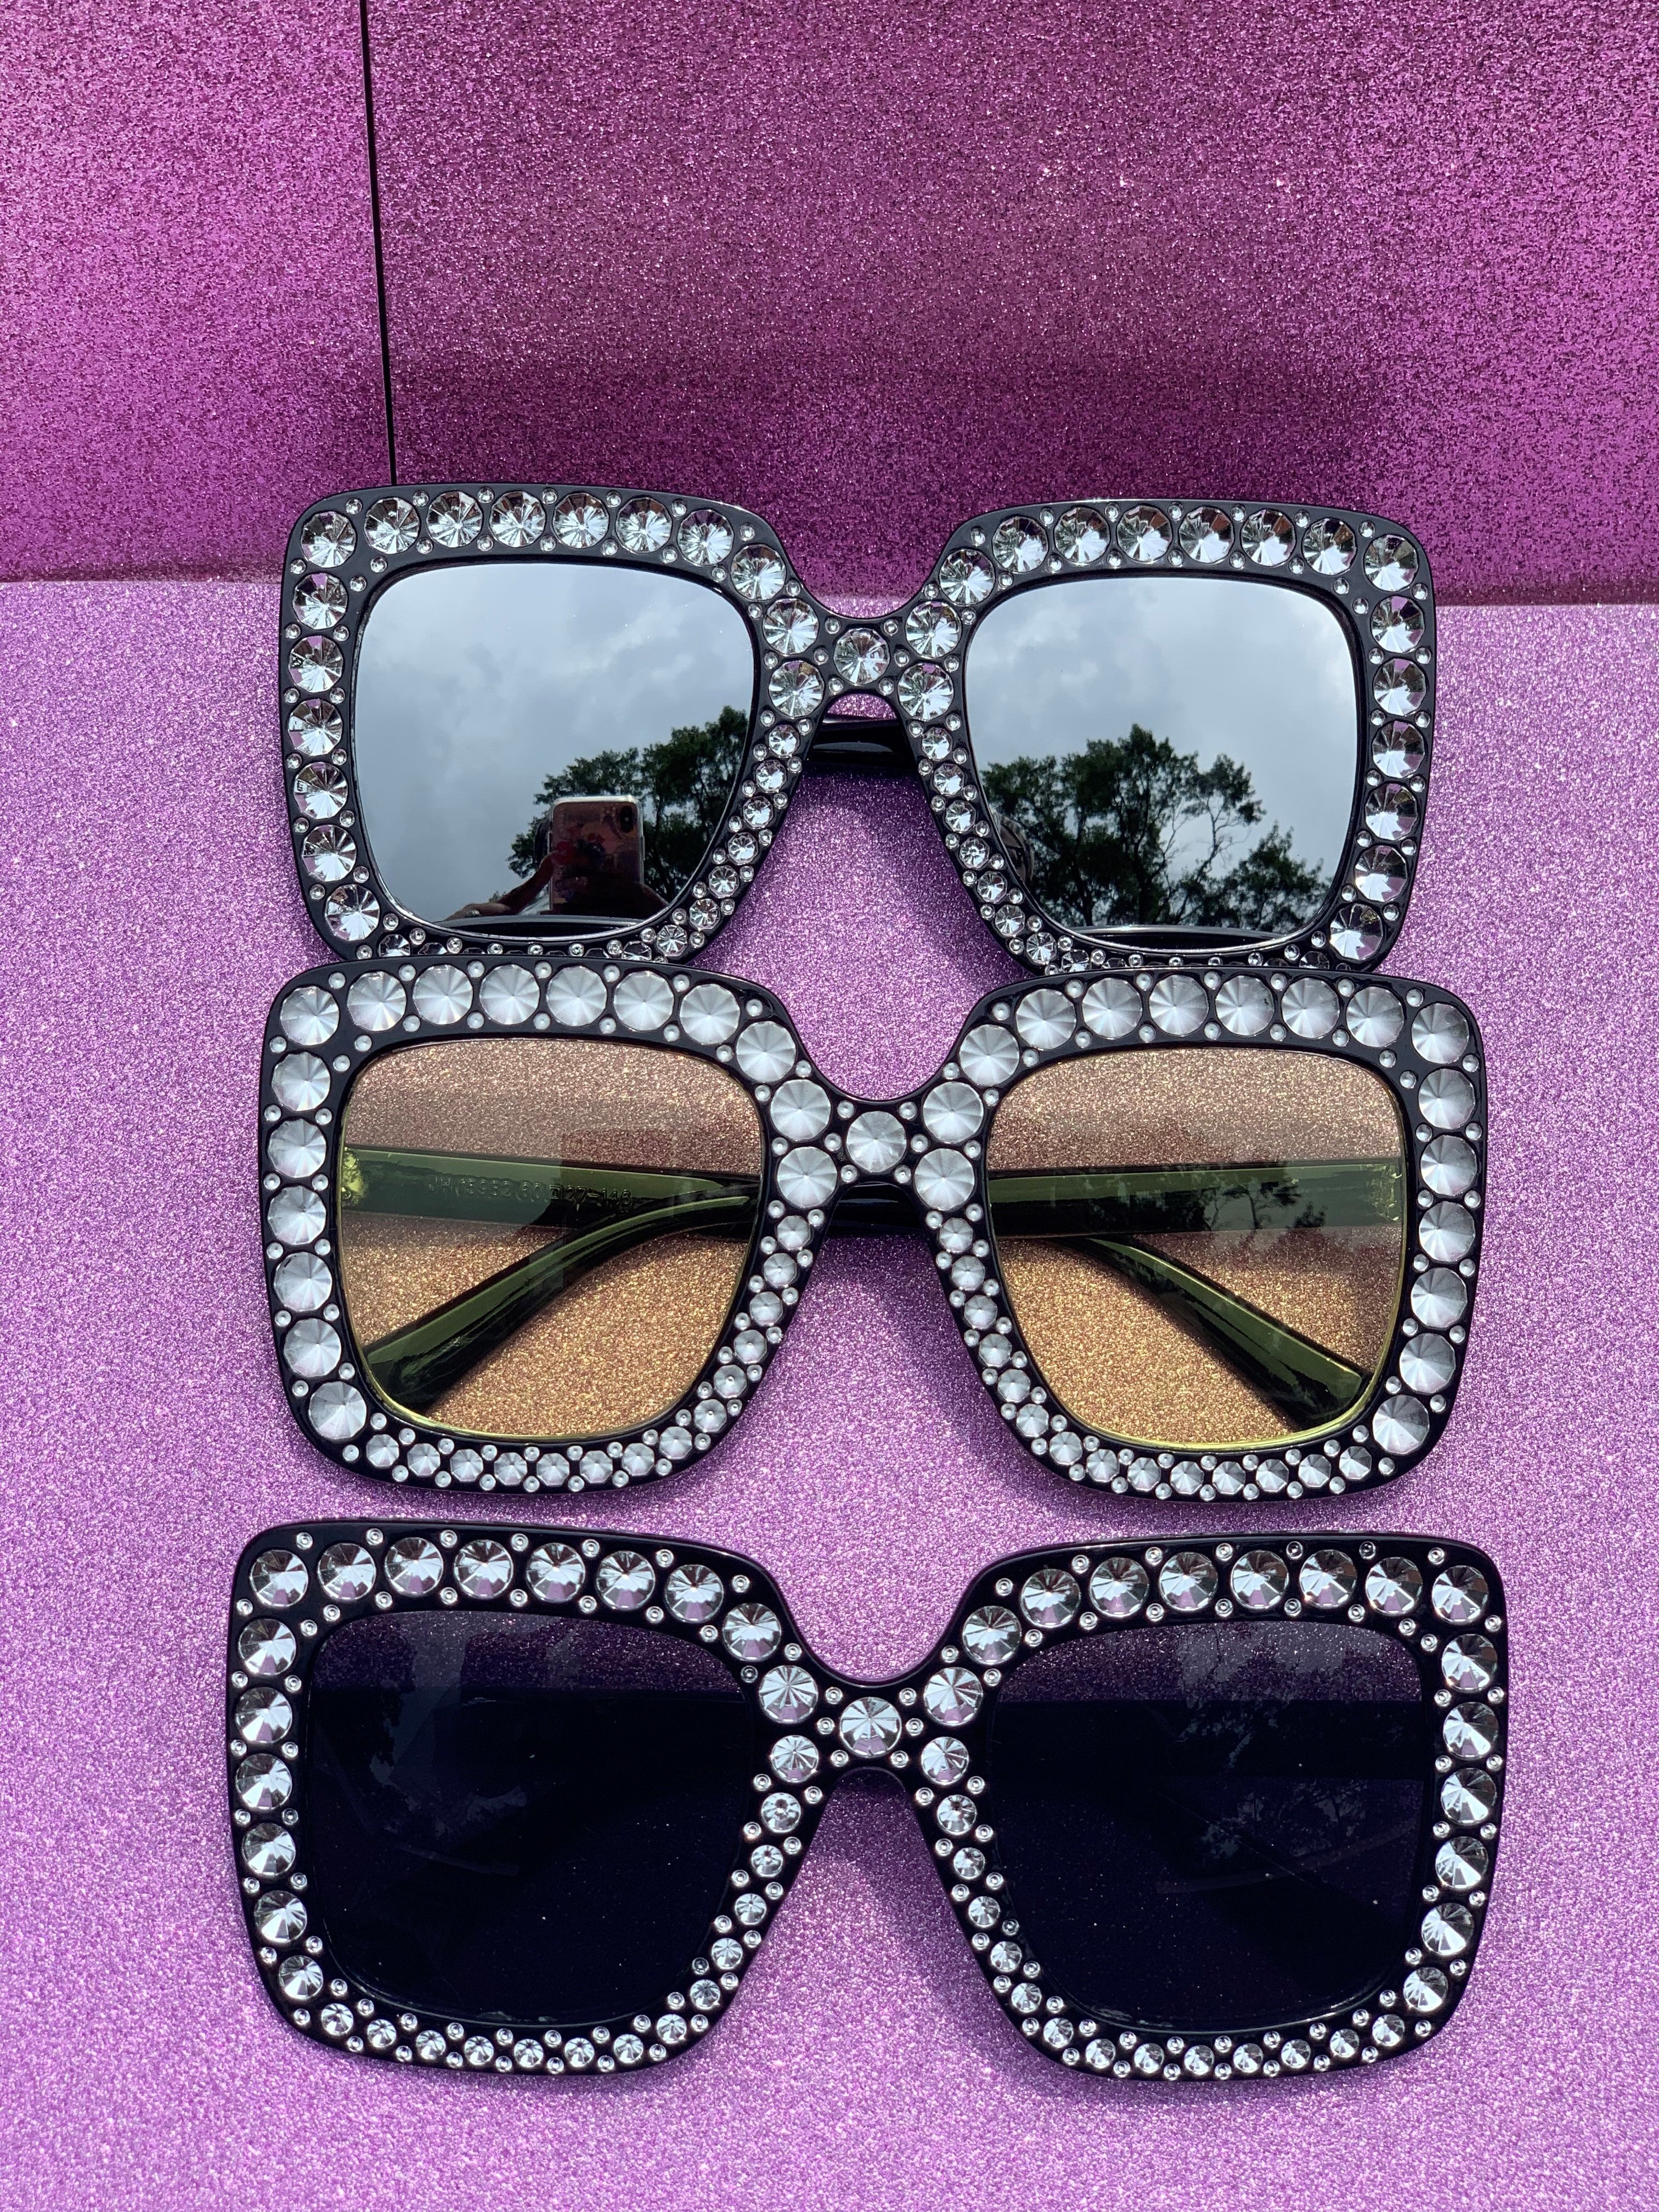 Donna Summers Sunnies – House of Tres Jolie